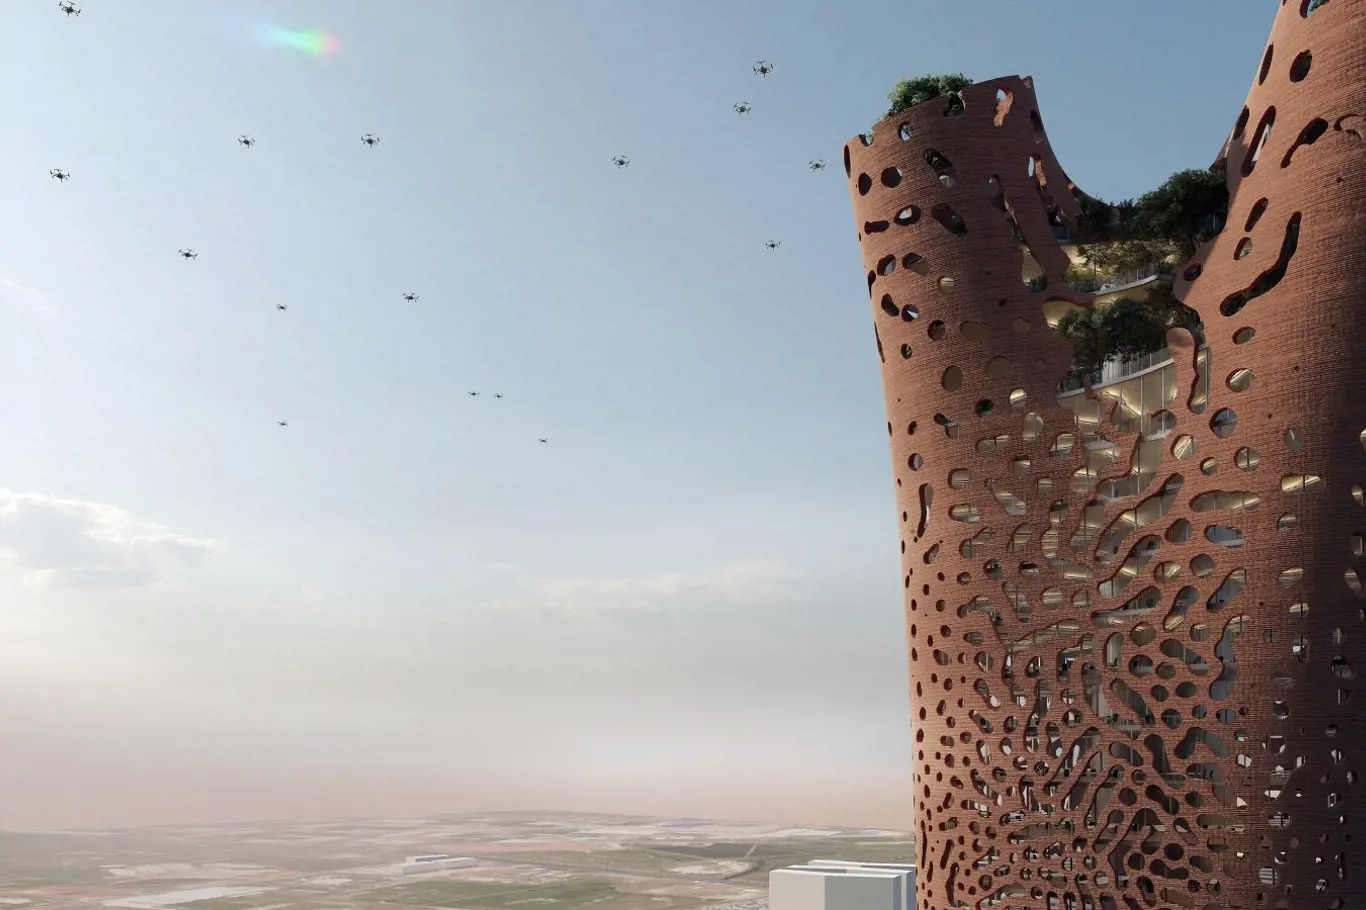 The Tower of Life by BAD - Built by Associative Data + Guallart Architects